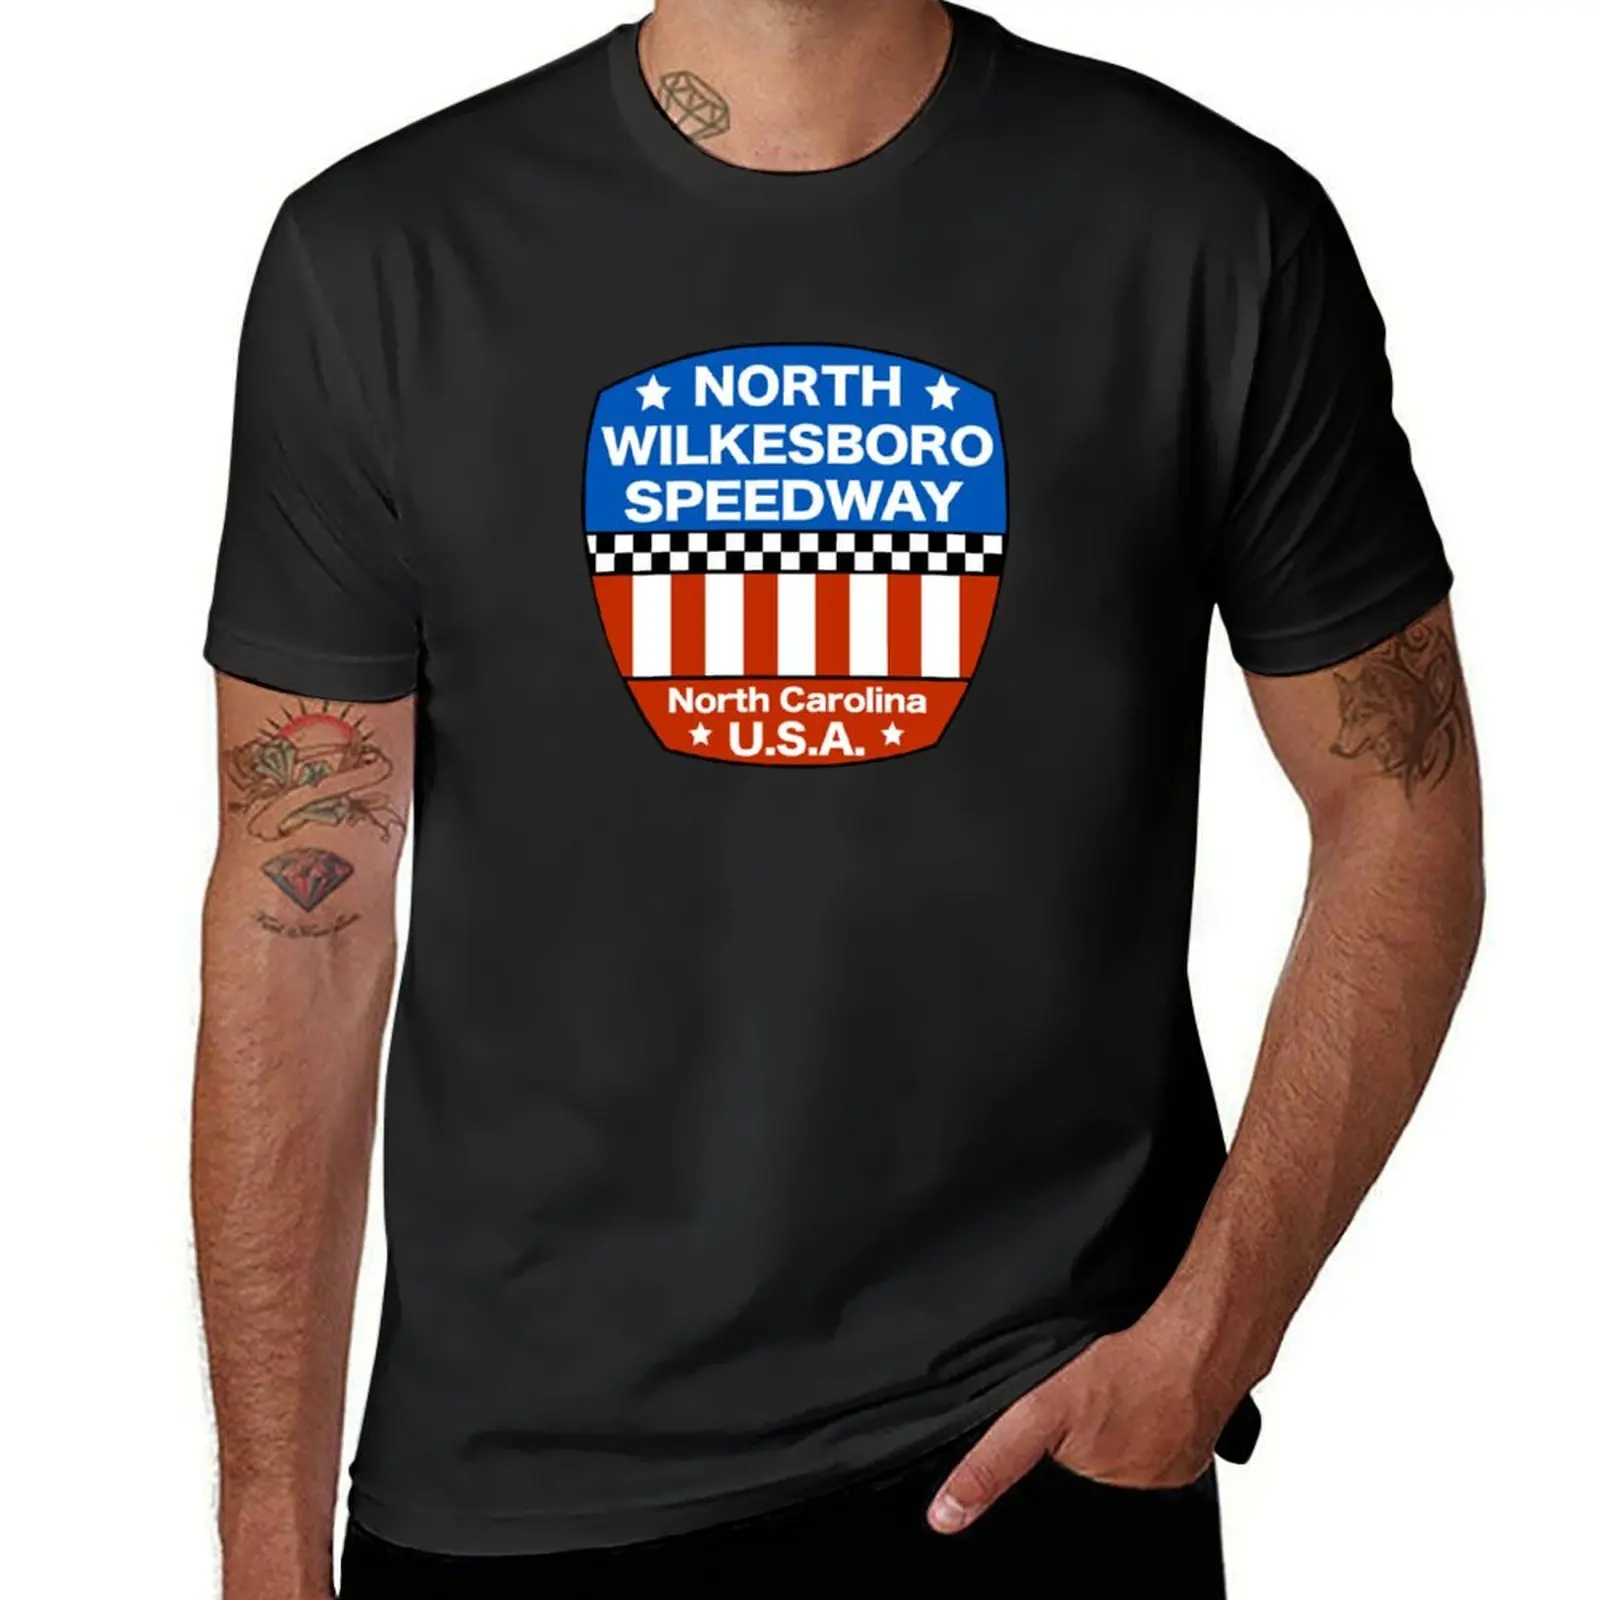 

North Wilkesboro Speedway T-Shirt aesthetic clothes summer tops plain mens t shirts casual stylish